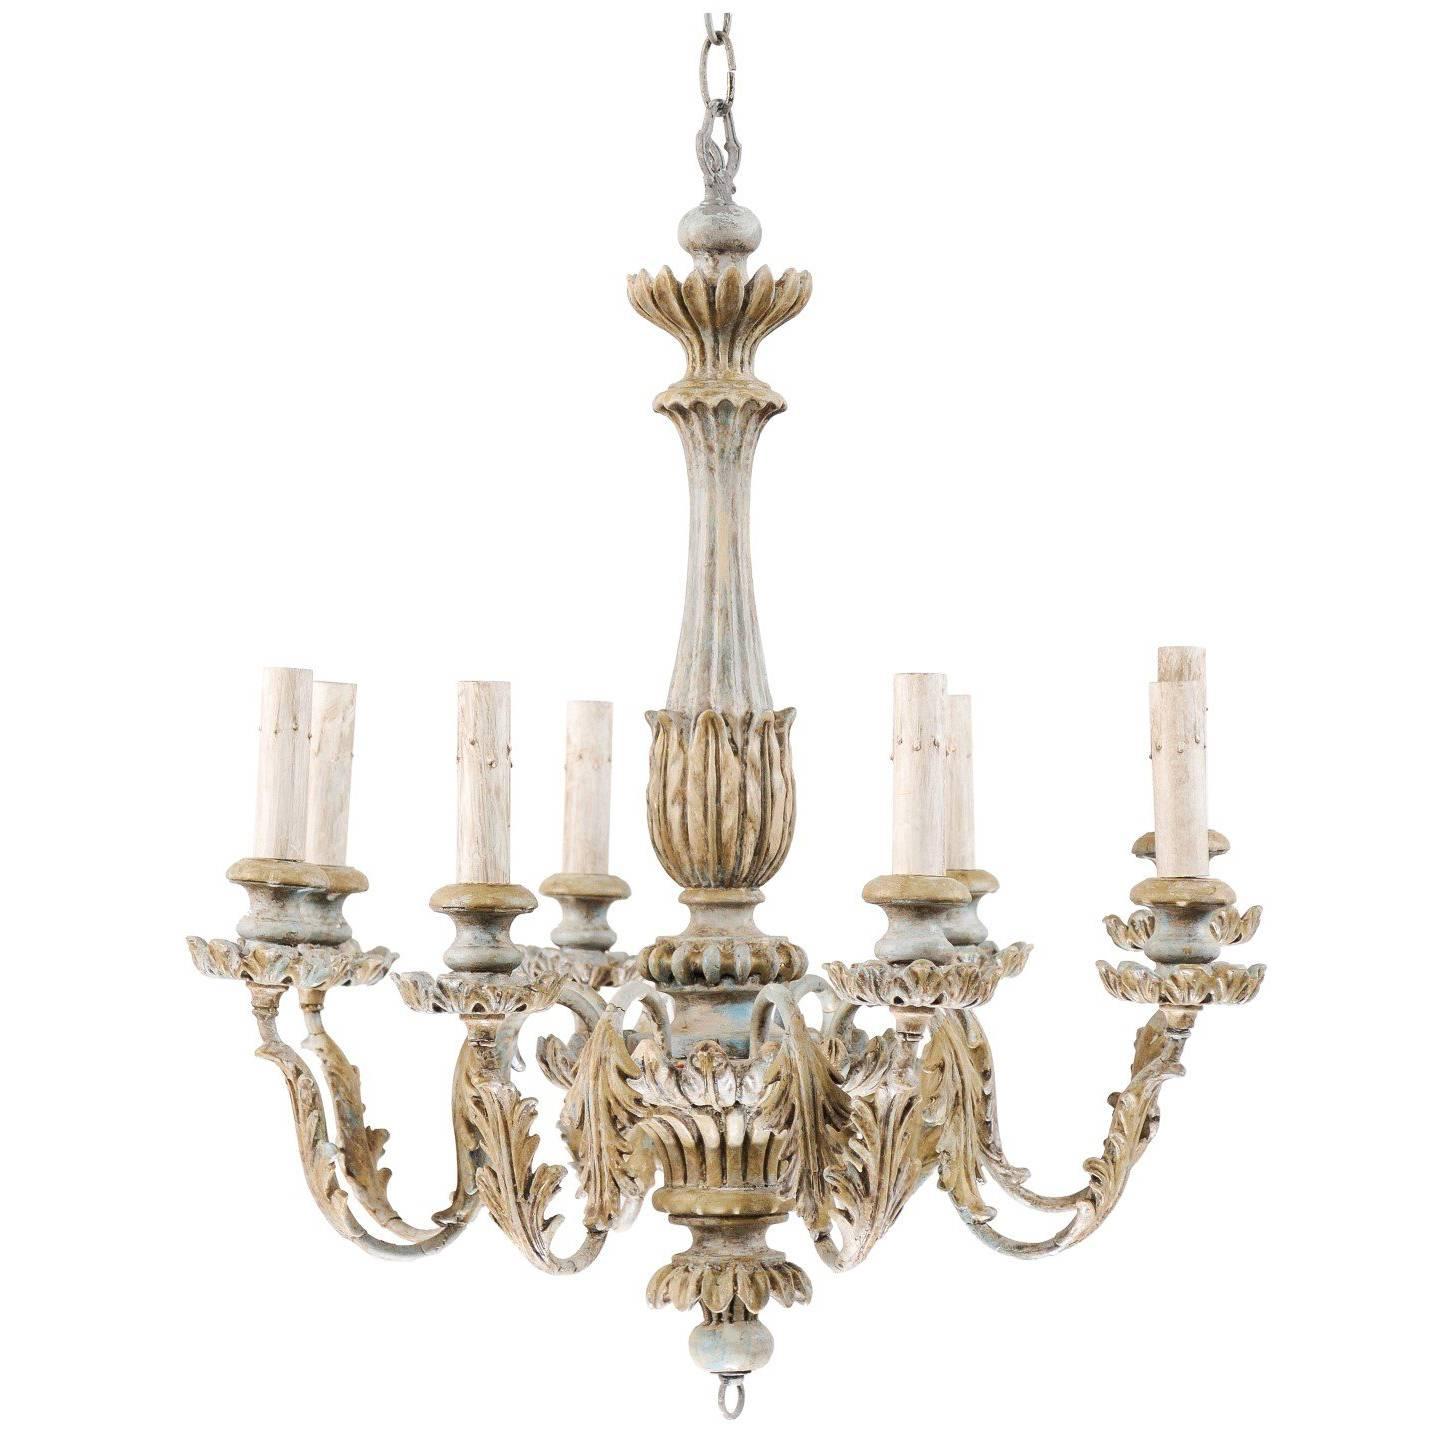 French Painted Wood and Metal Nicely Carved Chandelier with Acanthus Leaf Decor